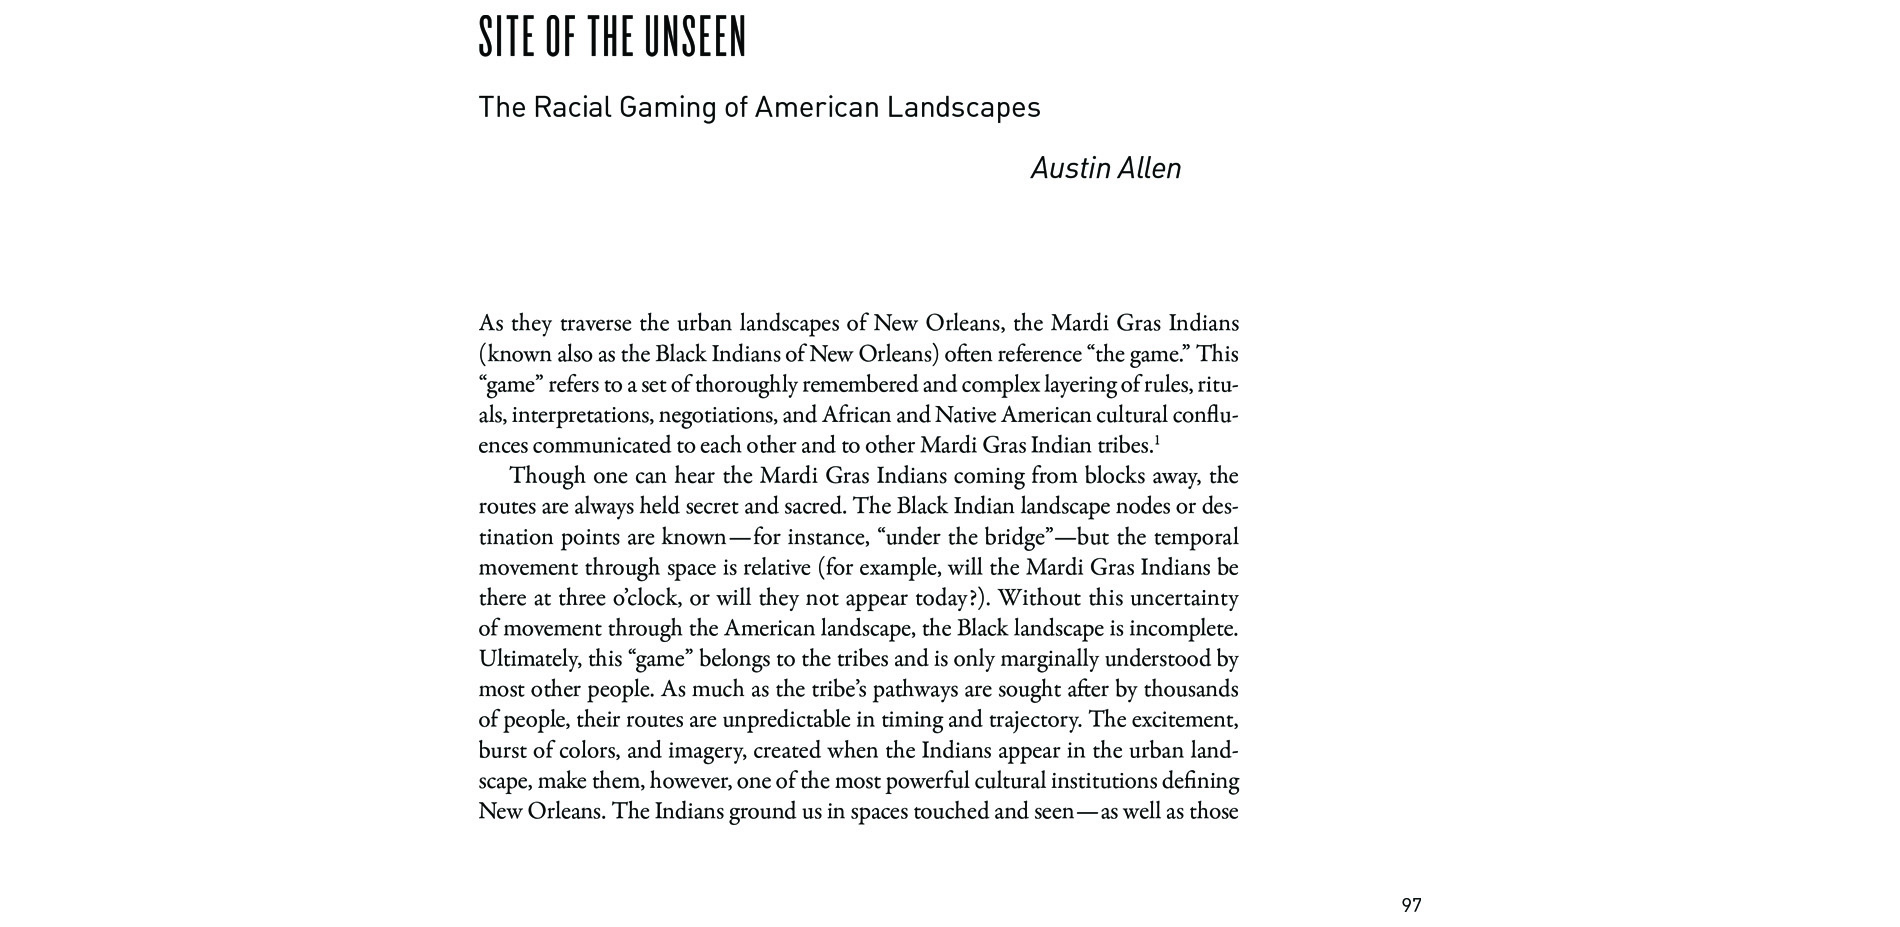 Black Landscapes Matter, Site of the Unseen: The Racial Gaming of American Landscapes (pg. 97)